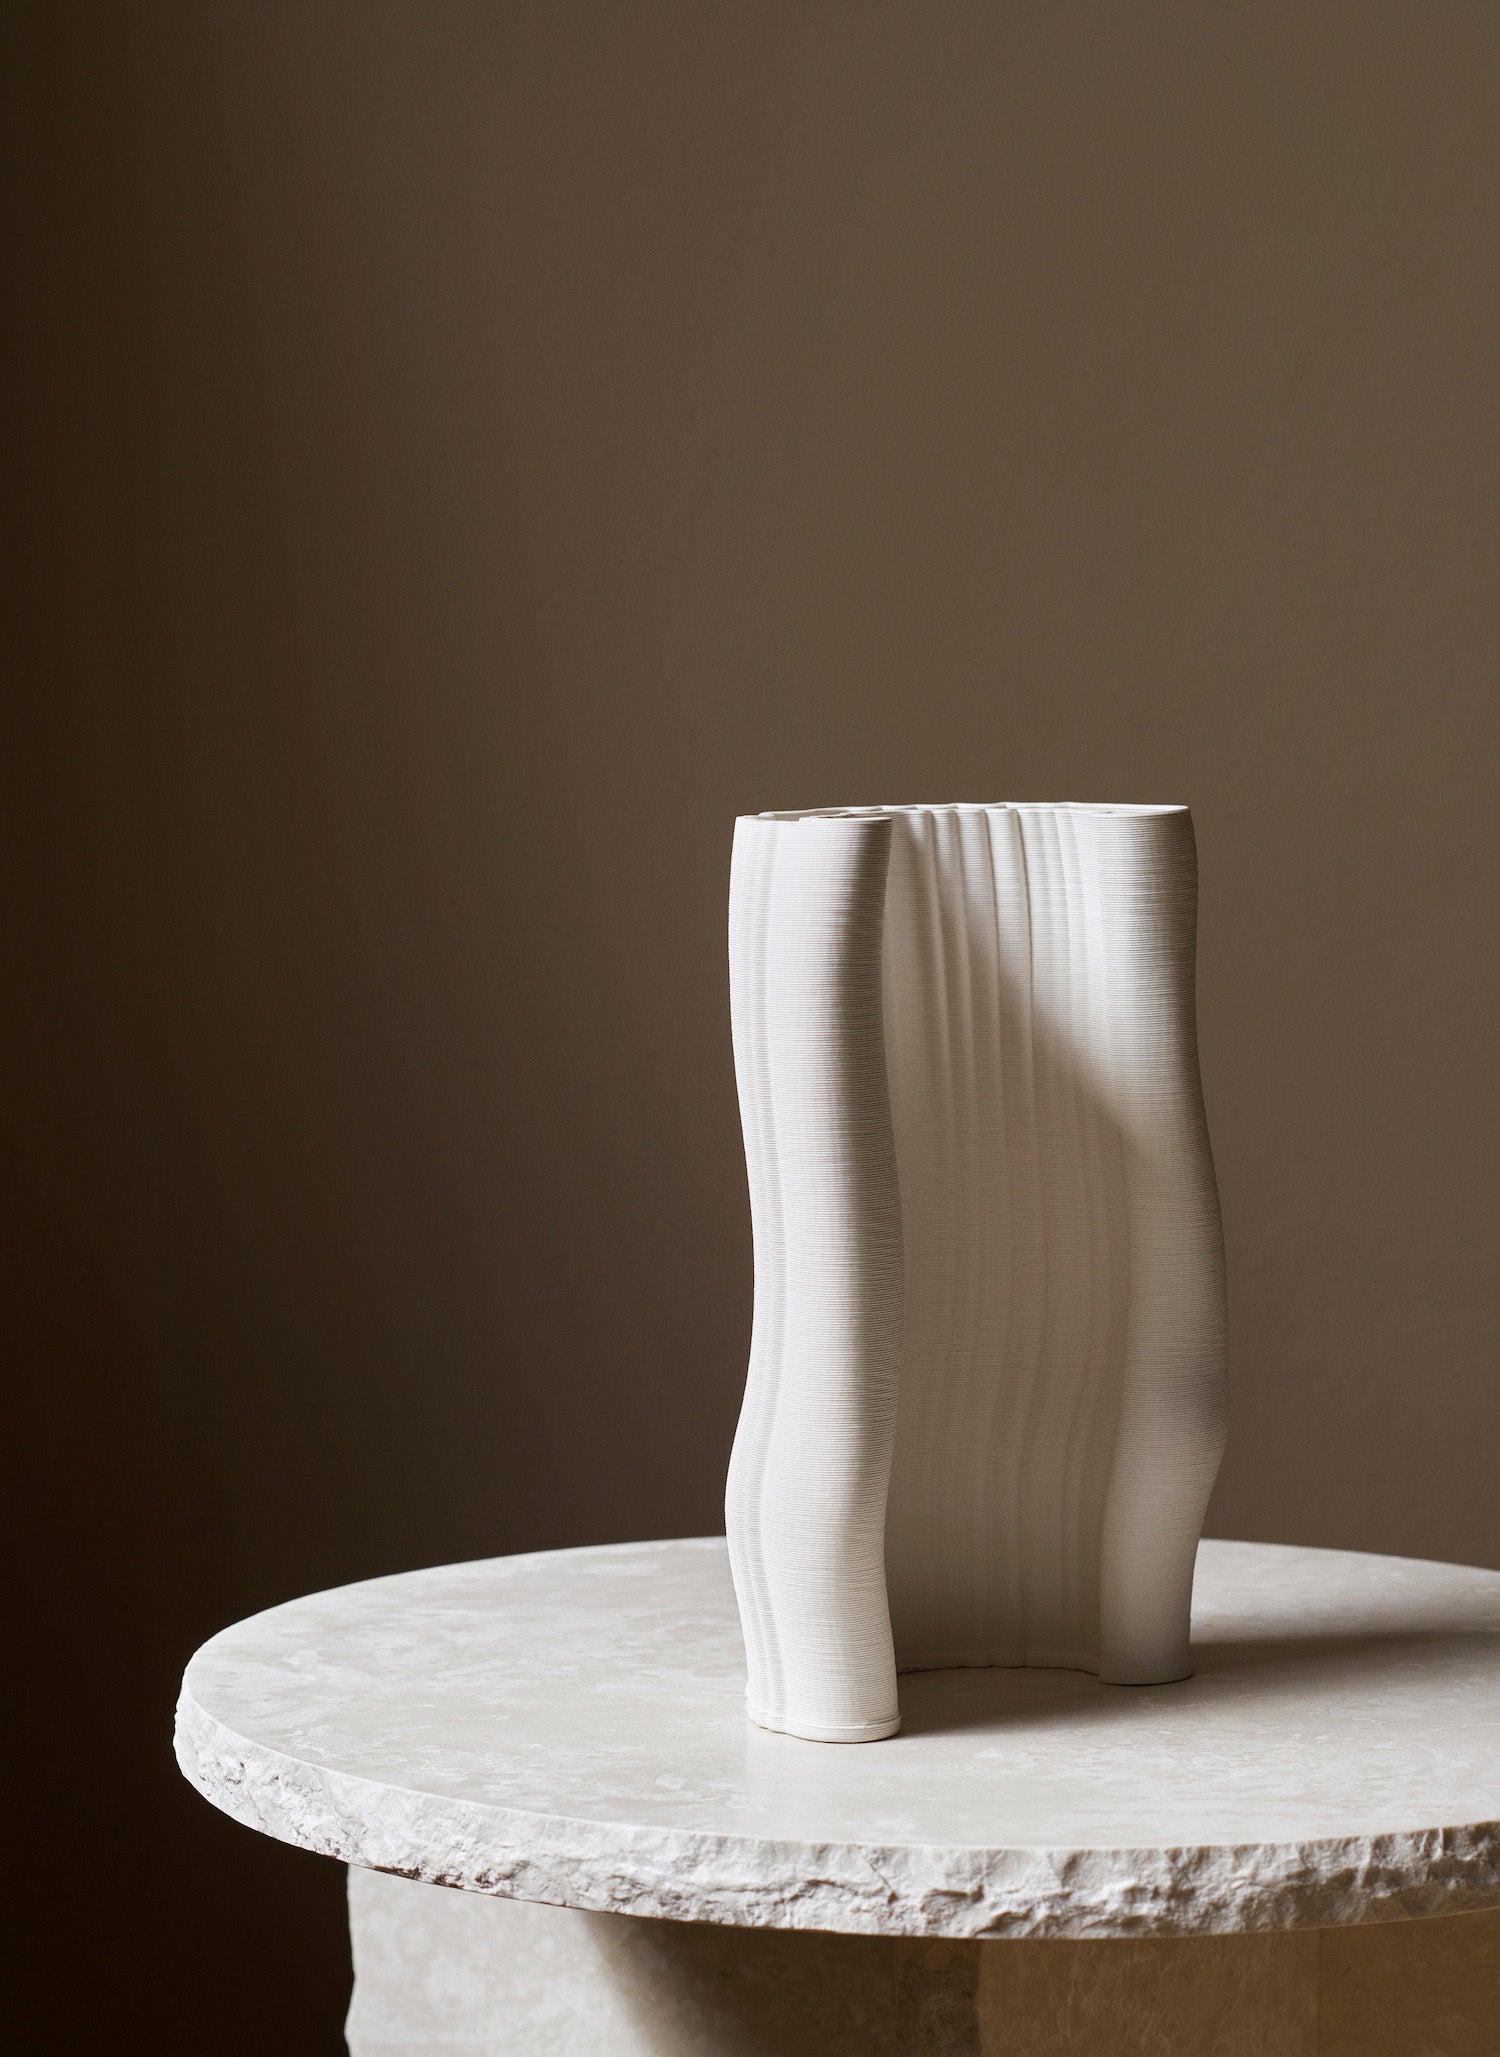 Moiré Vase. An inspired vase created through digital 3-D printing of clay, with thin layers that gradually form a subtle pattern. 